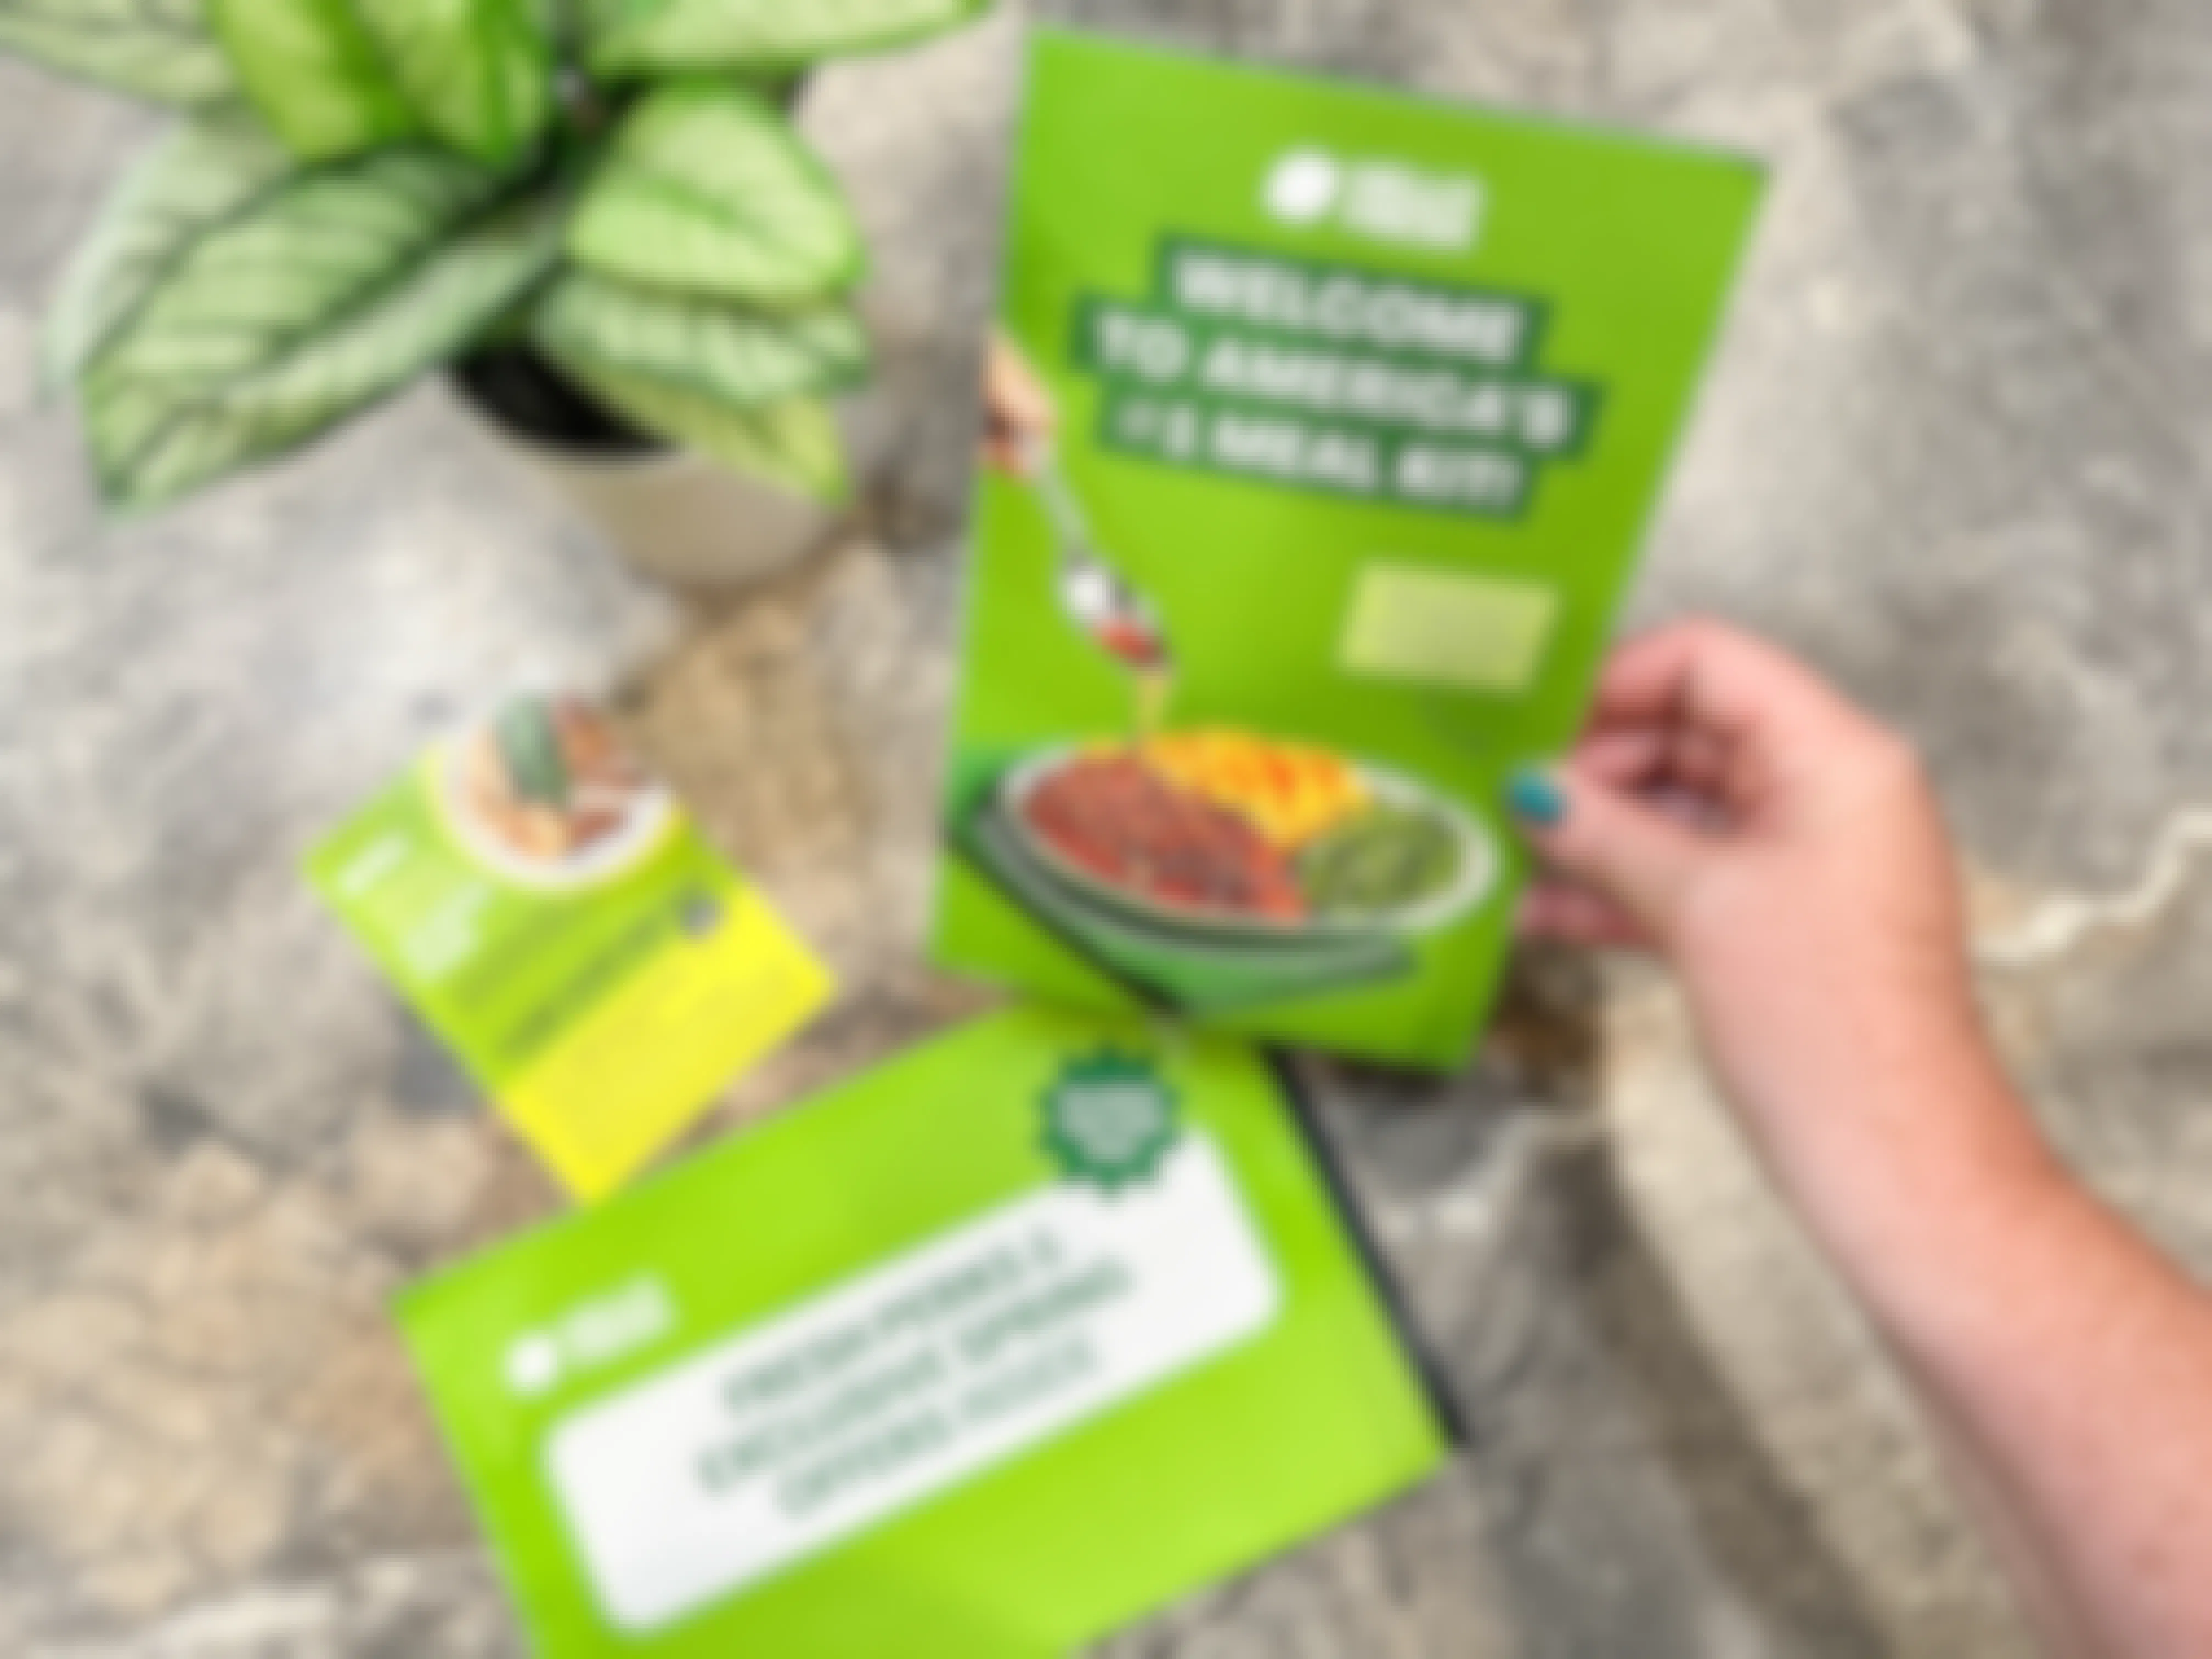 hello fresh coupons from box kit on counter 